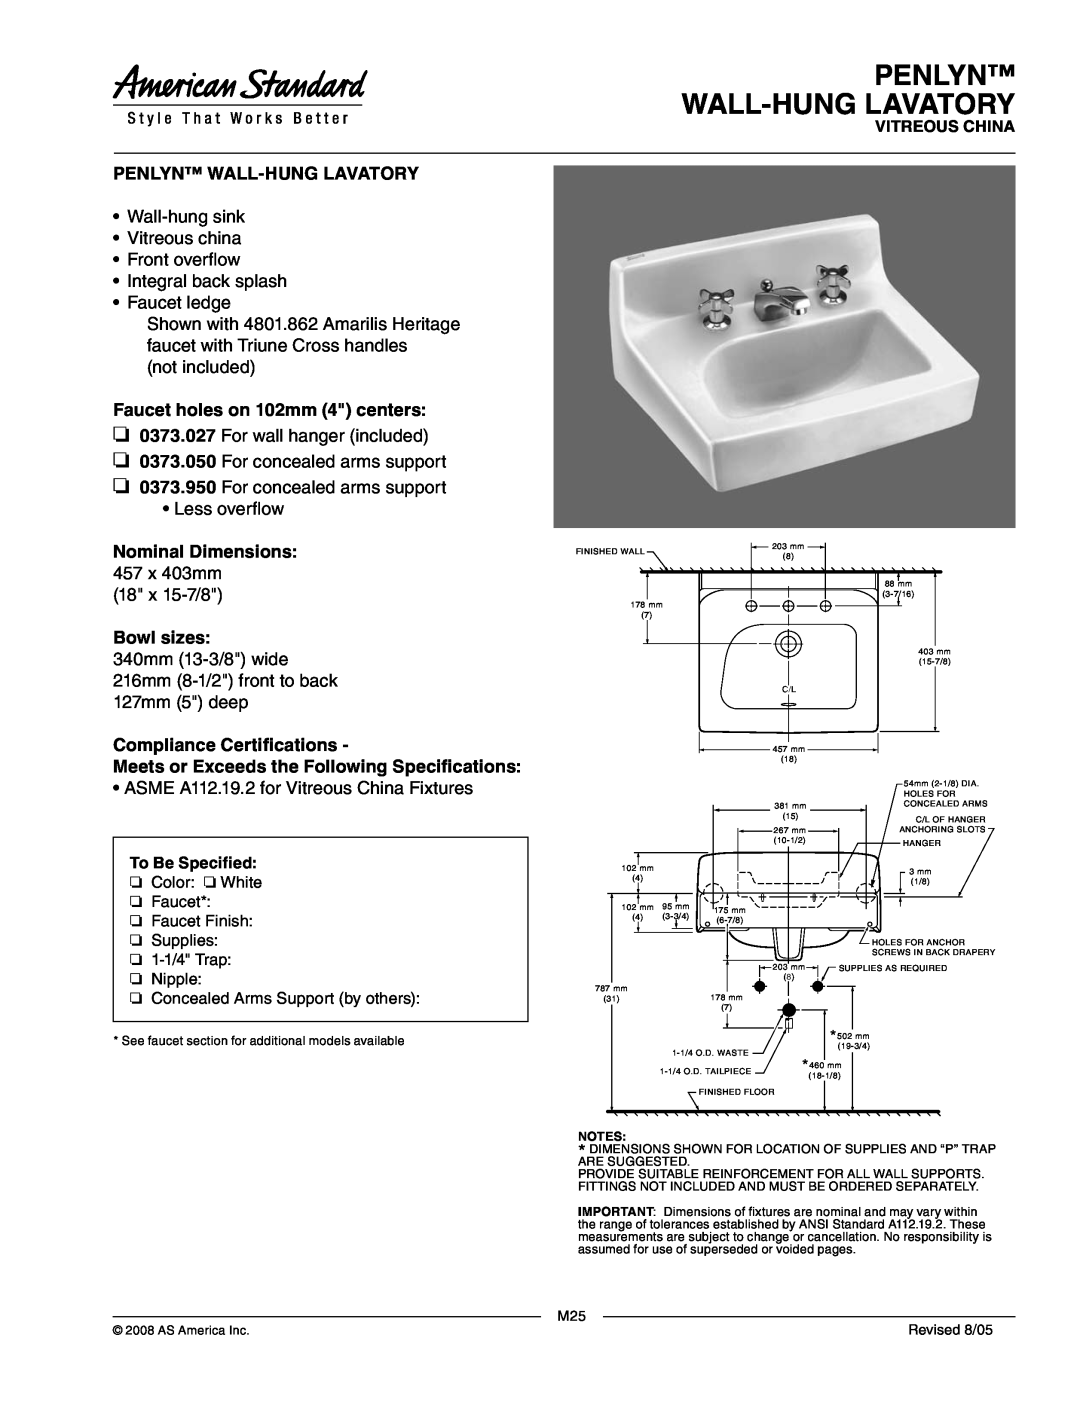 American Standard 0373.027 dimensions Penlyn Wall-Hunglavatory, Faucet holes on 102mm 4 centers, Nominal Dimensions 